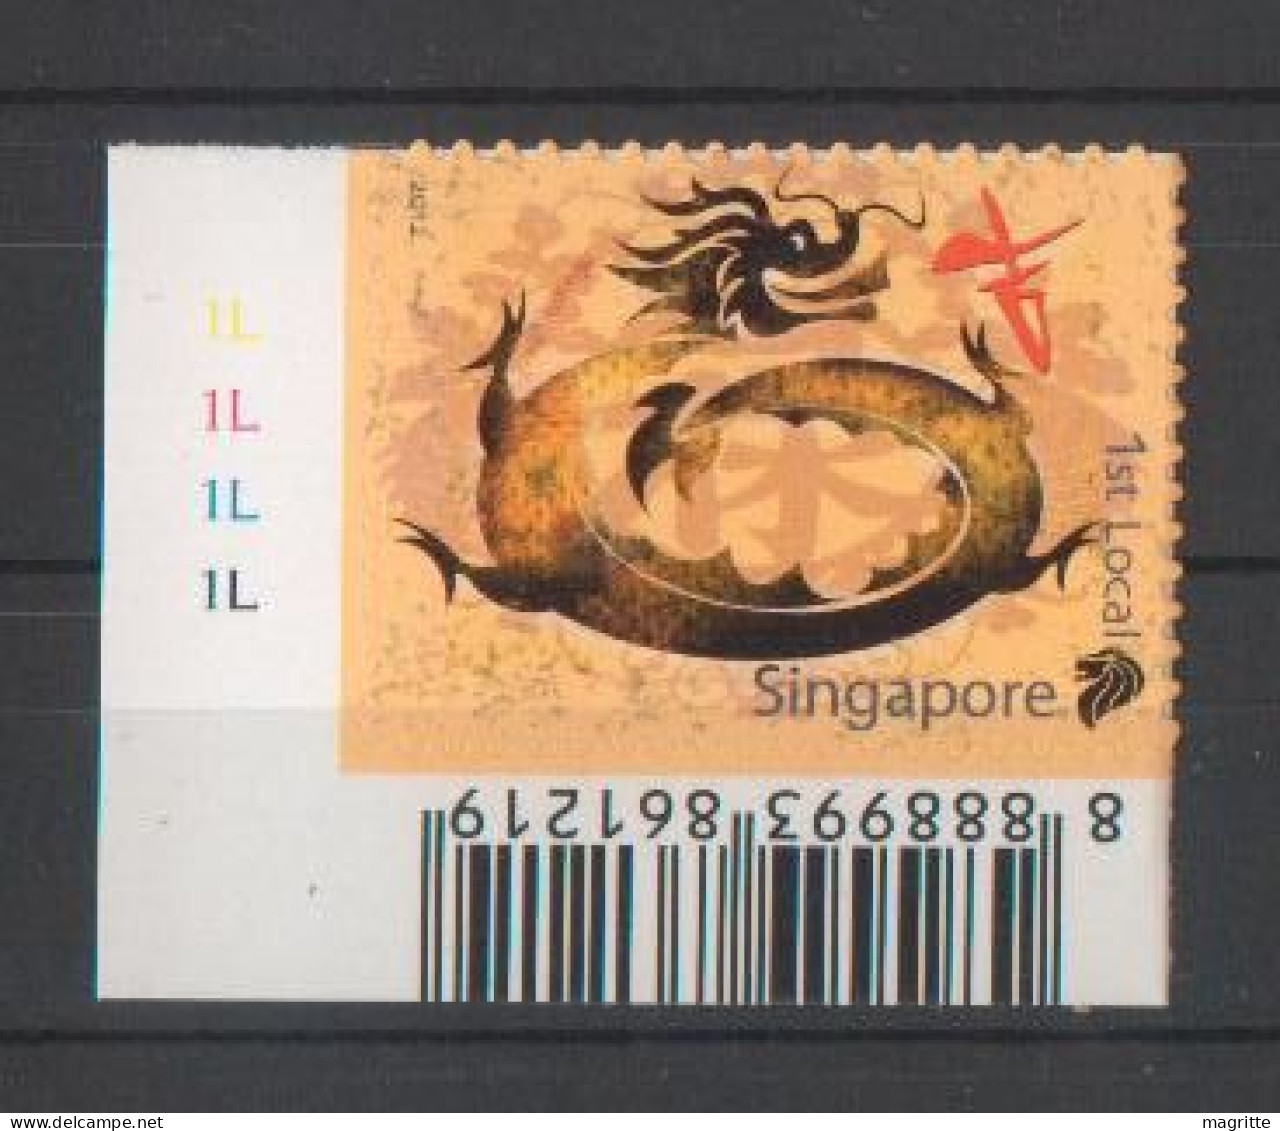 Singapour 2012 Année Du Dragon Autocollant  Singapore Lunar Year Of Dragon Self Adhesive Stamp - Chinese New Year